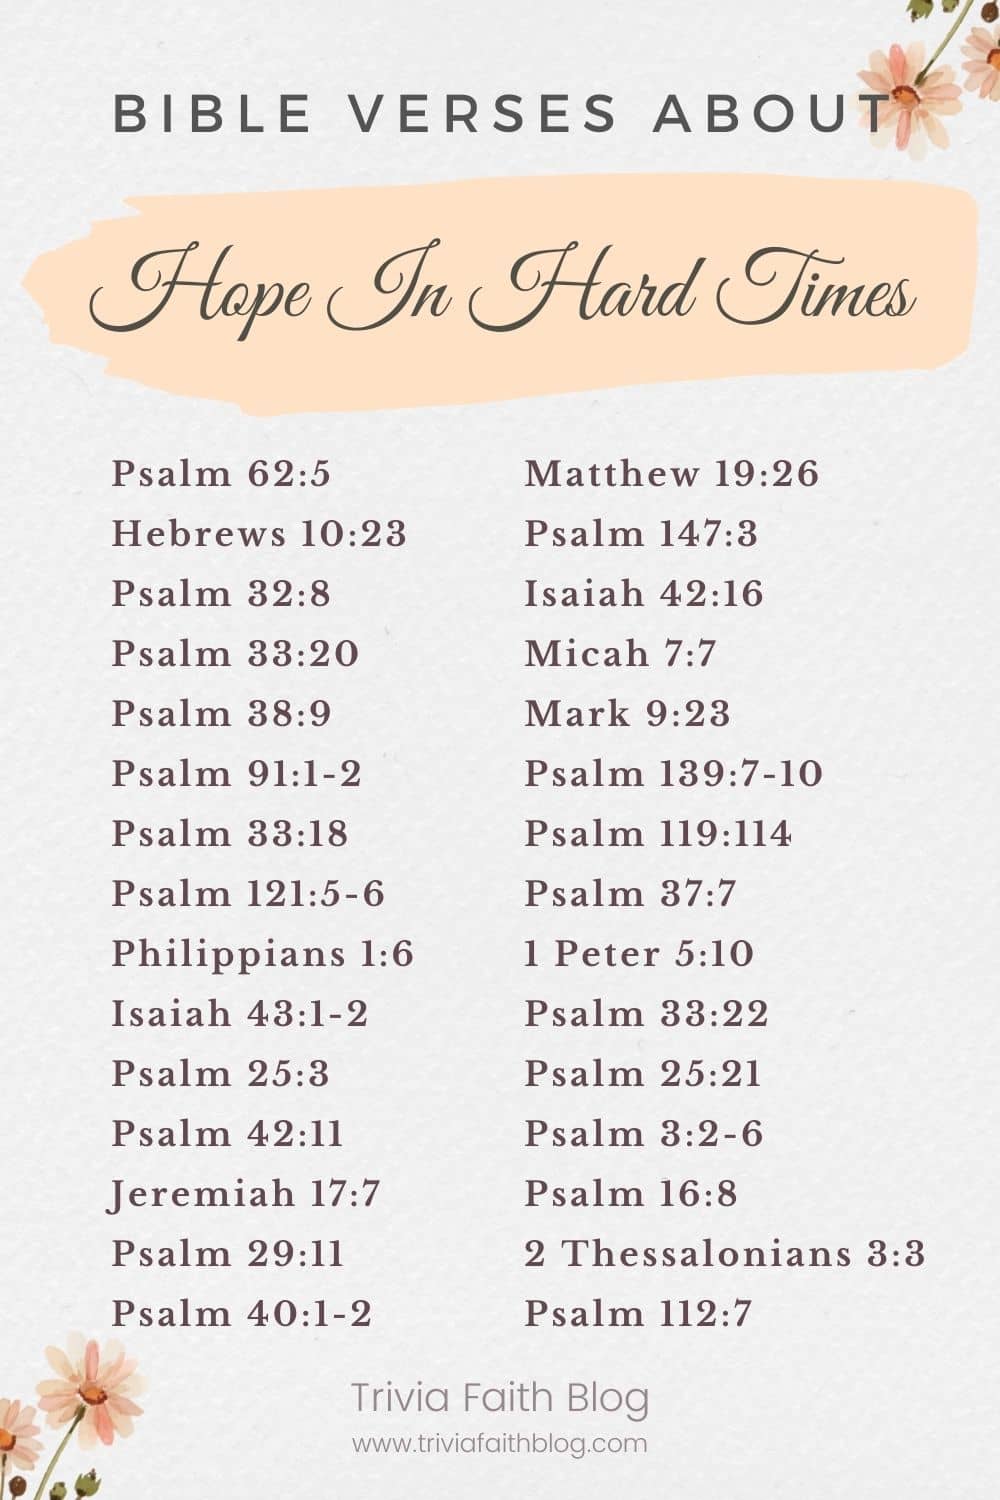 Bible verses about hope in hard times